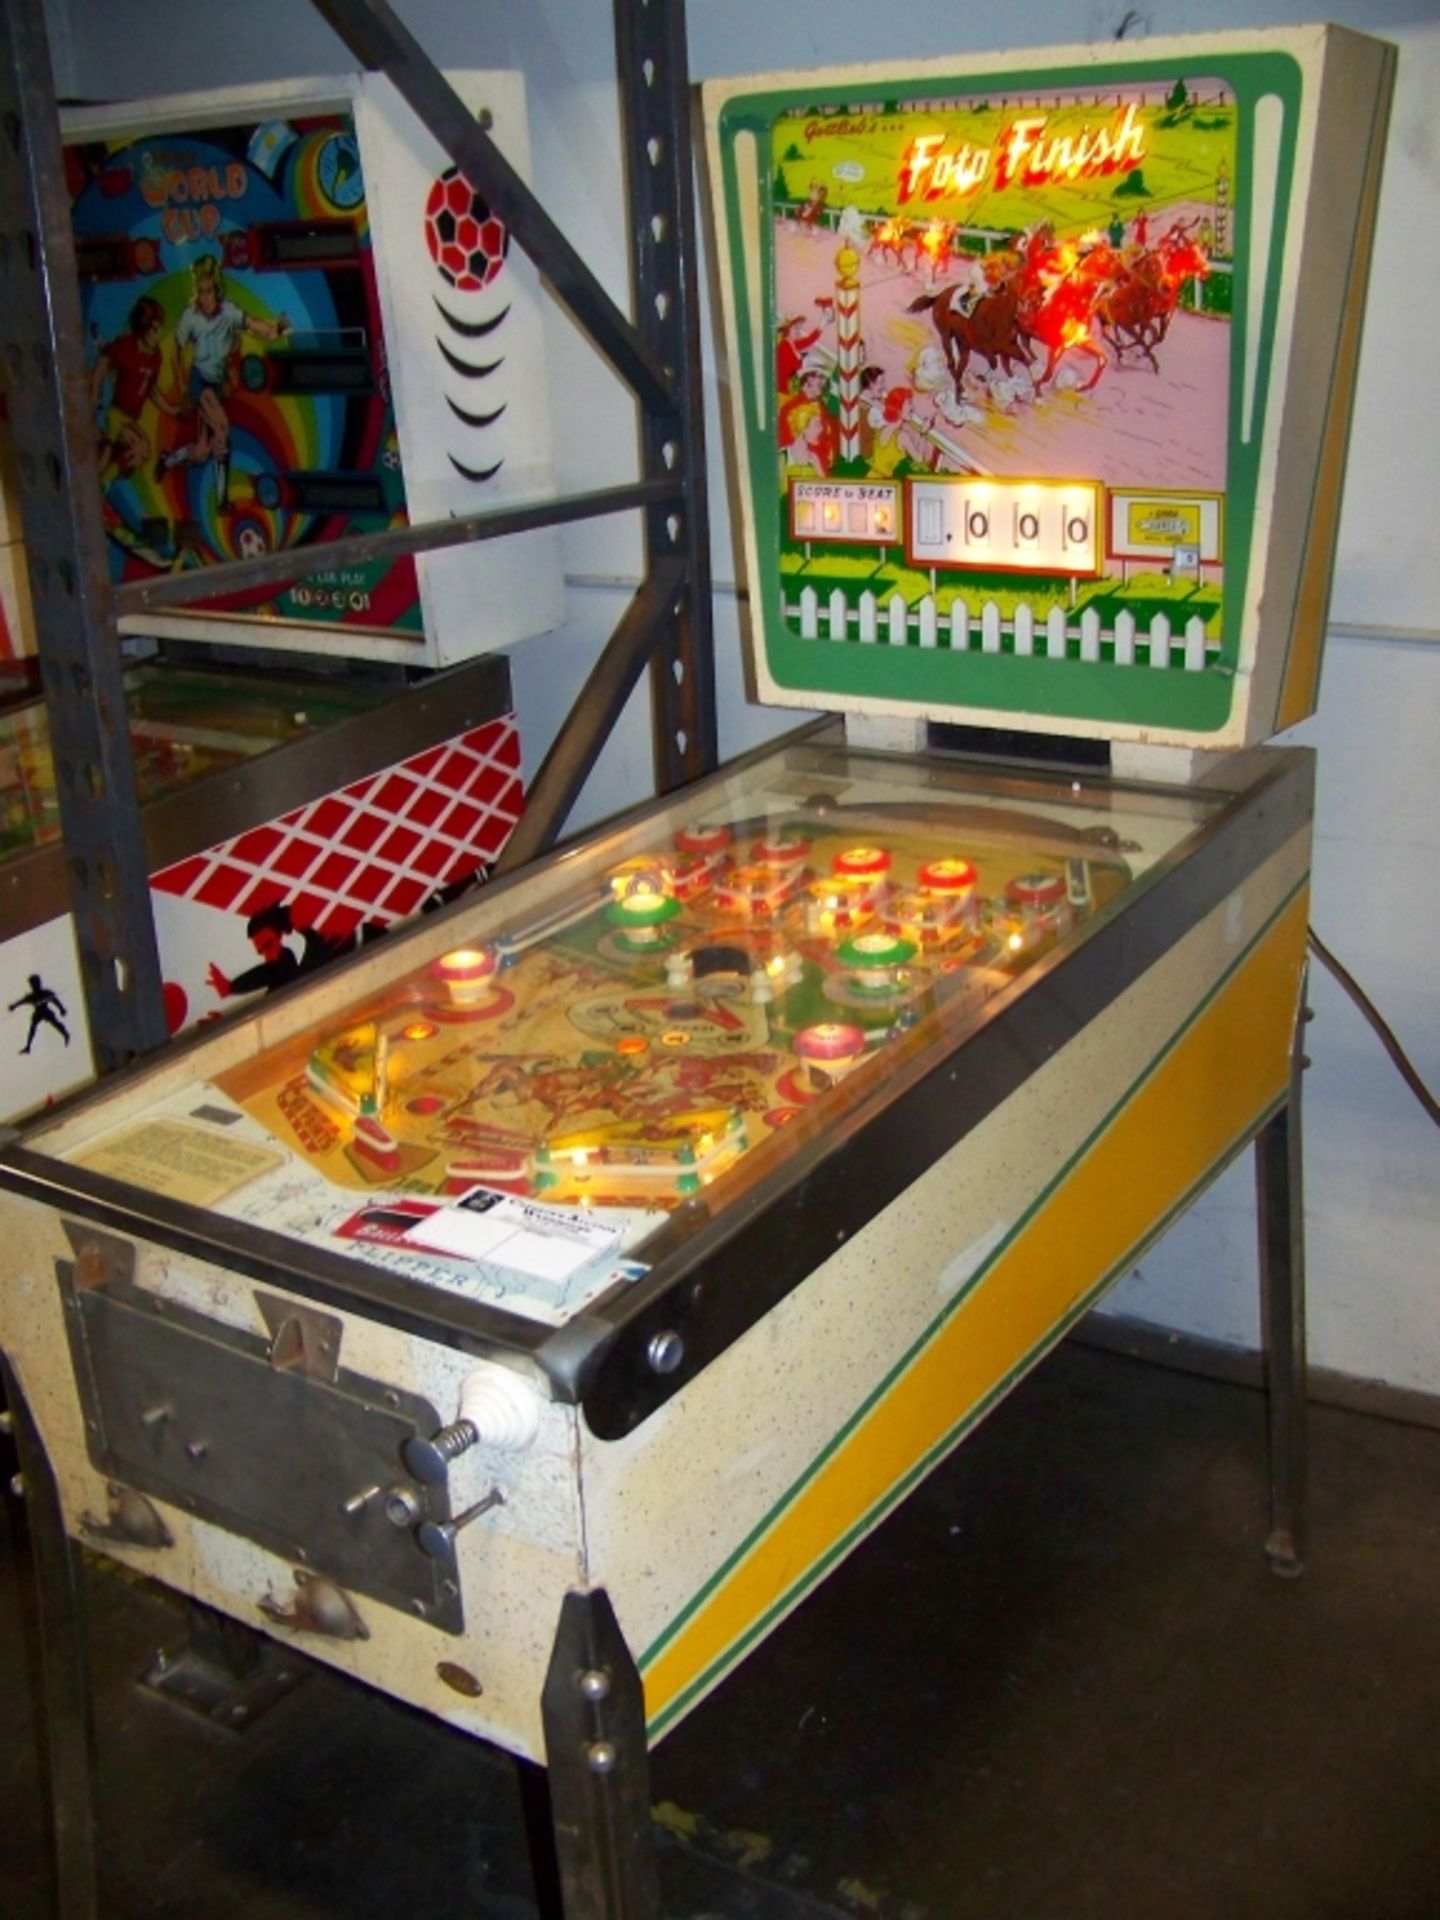 FOTO FINISH PINBALL MACHINE GOTTLIEB 1961 Item is in used condition. Evidence of wear and commercial - Image 3 of 7